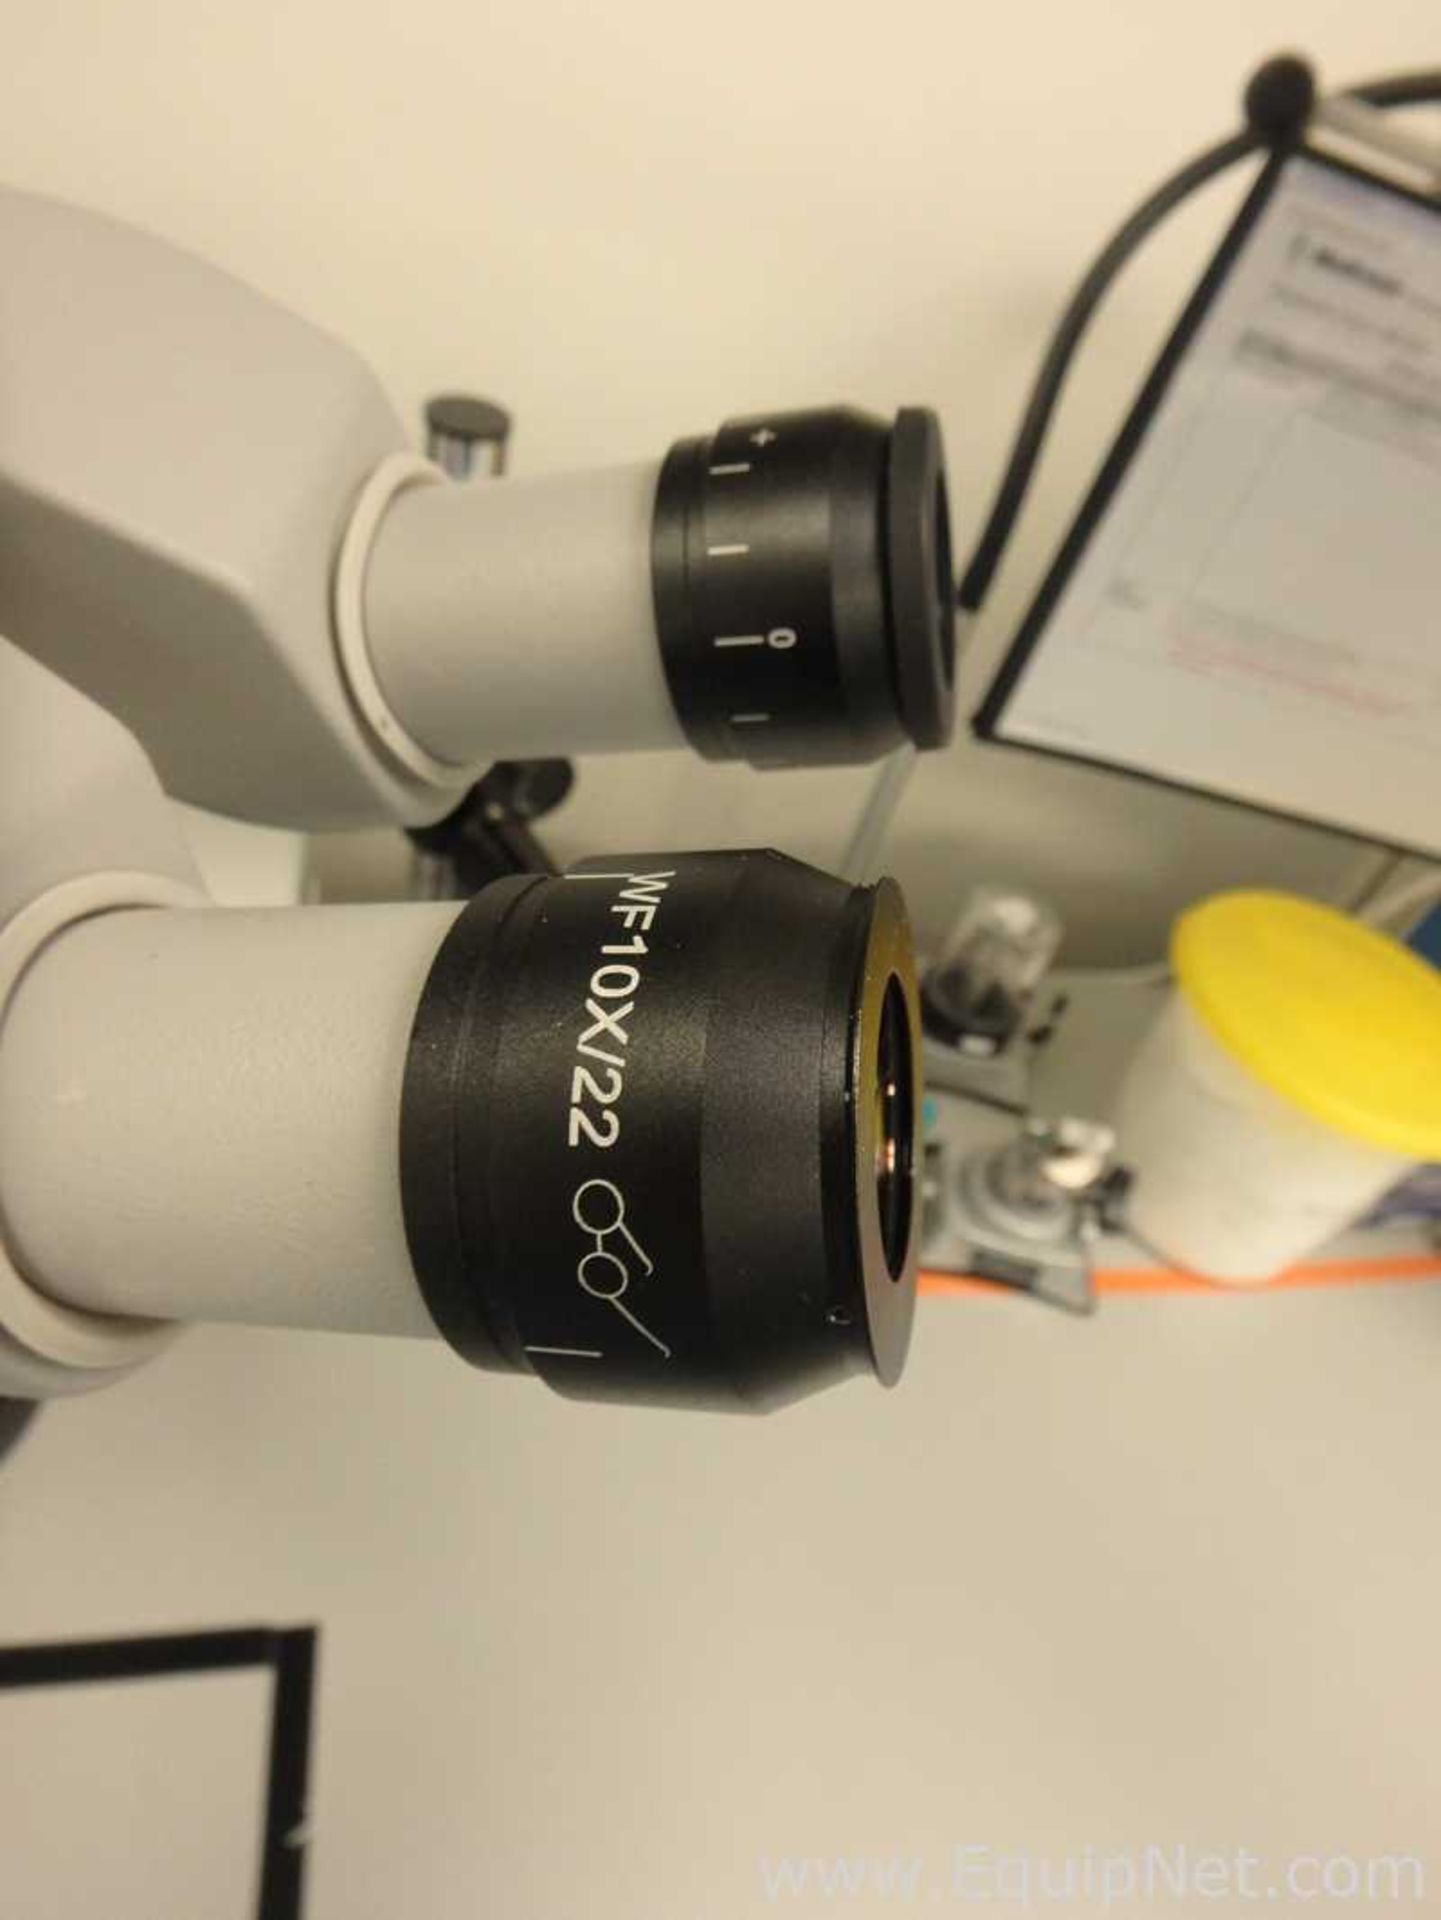 Boom Mounted Stereo Microscope - Image 7 of 12